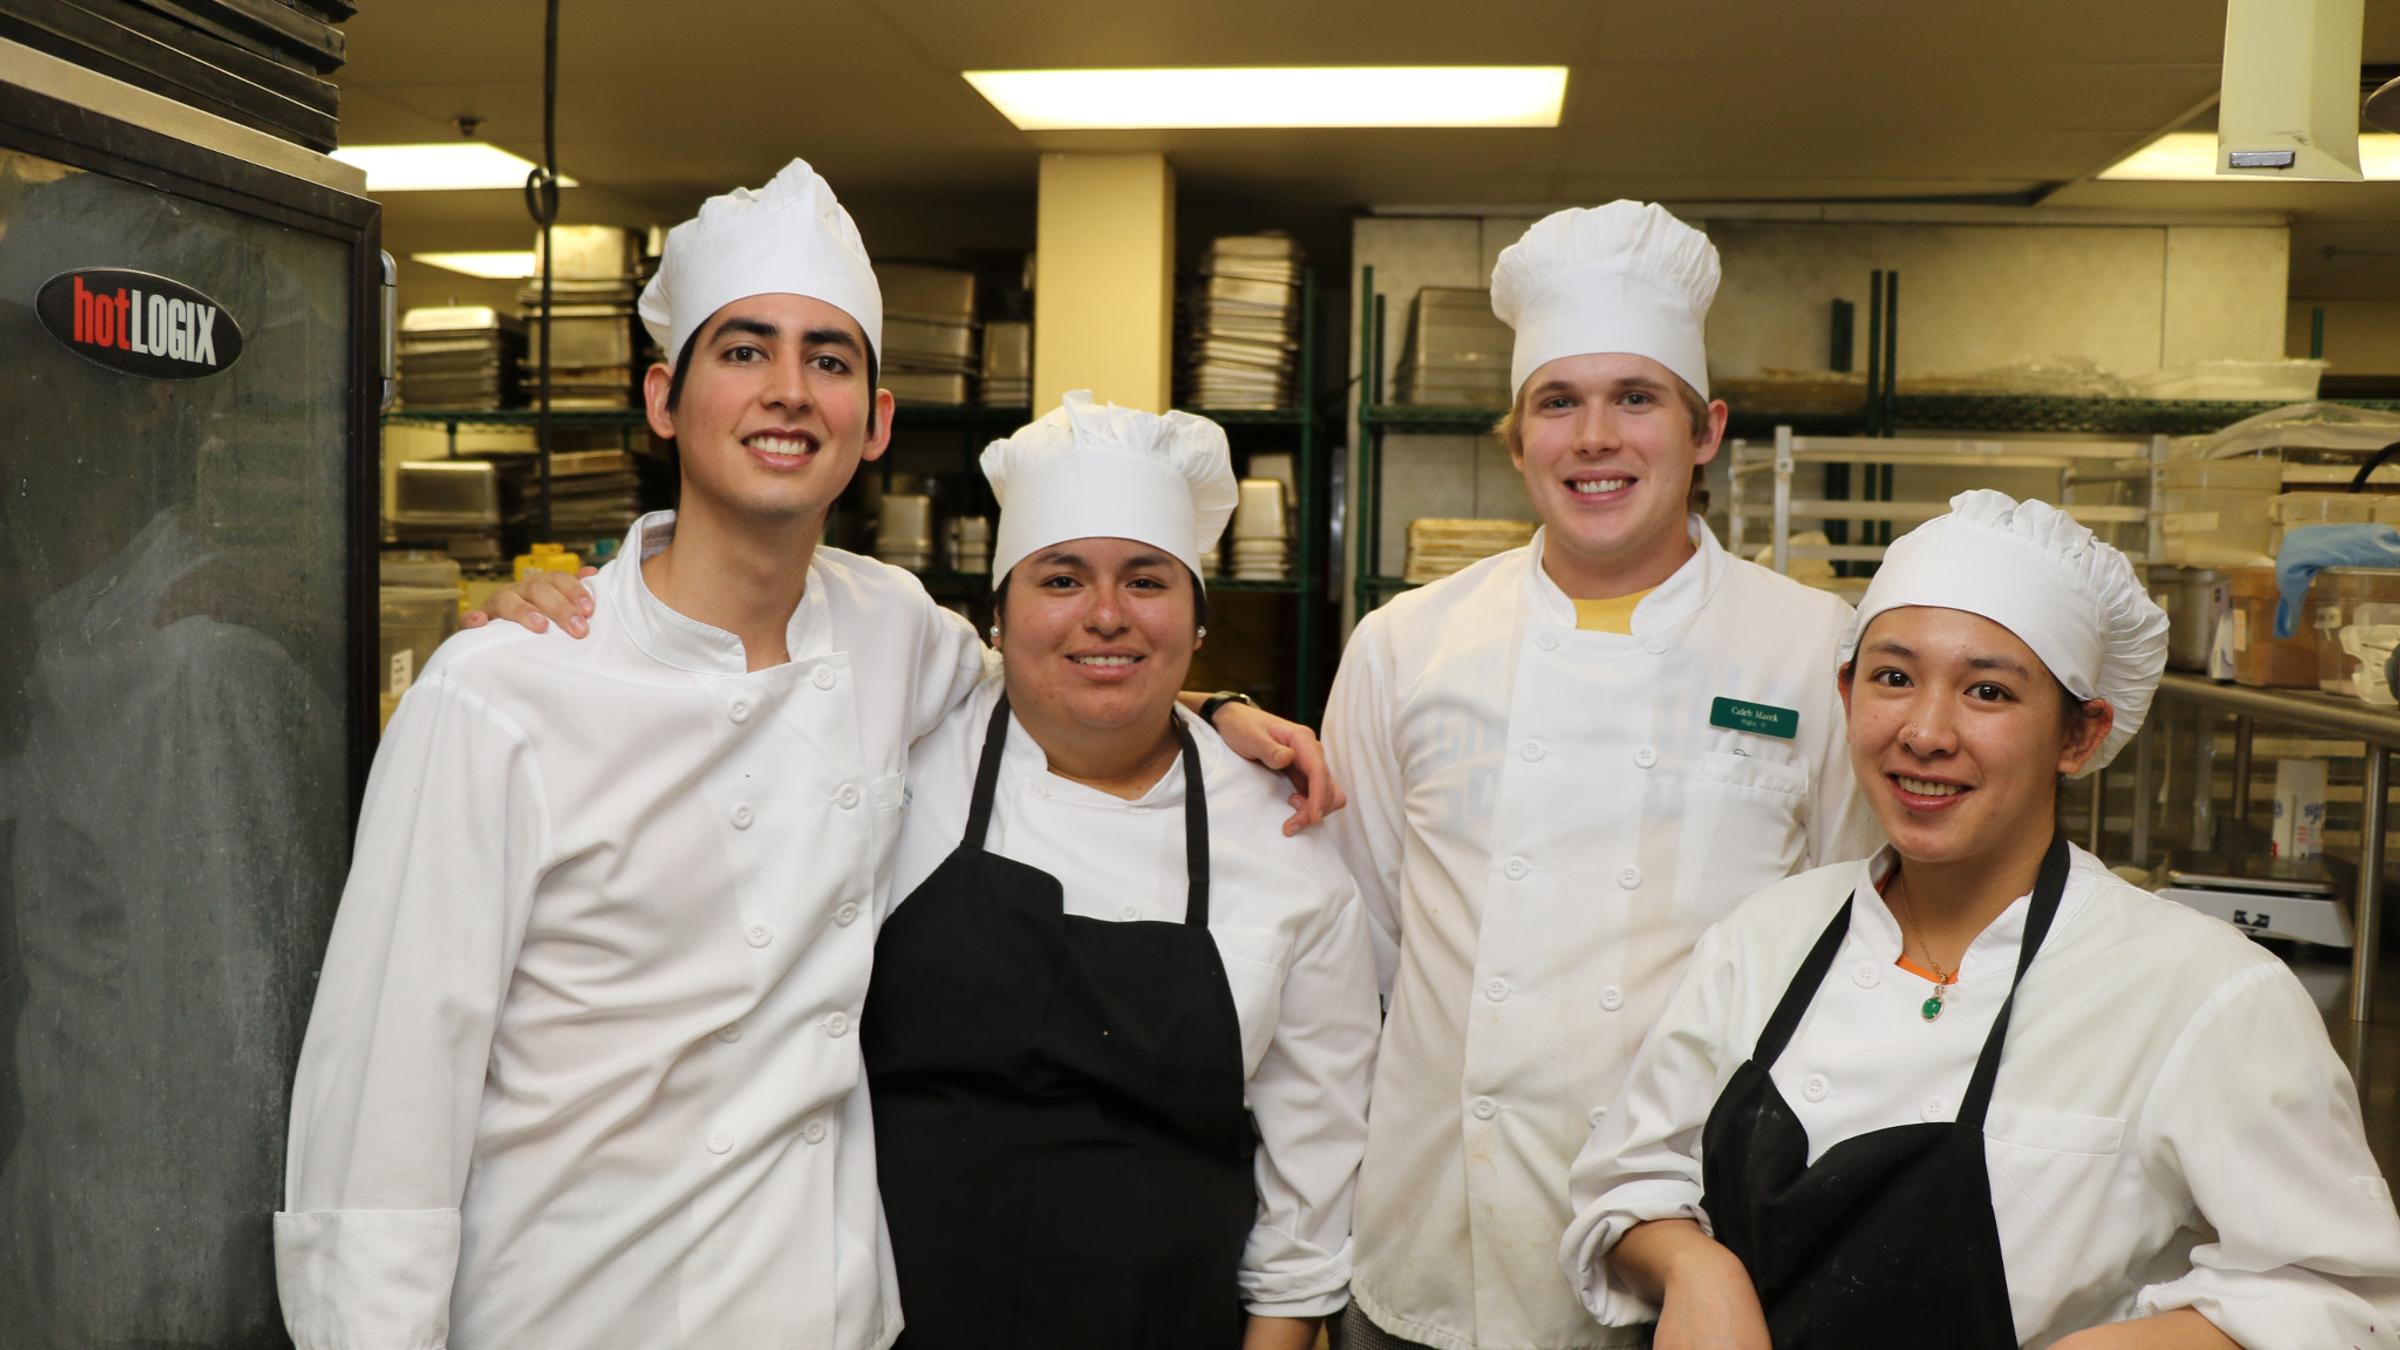 Deer Valley culinary staff smiling